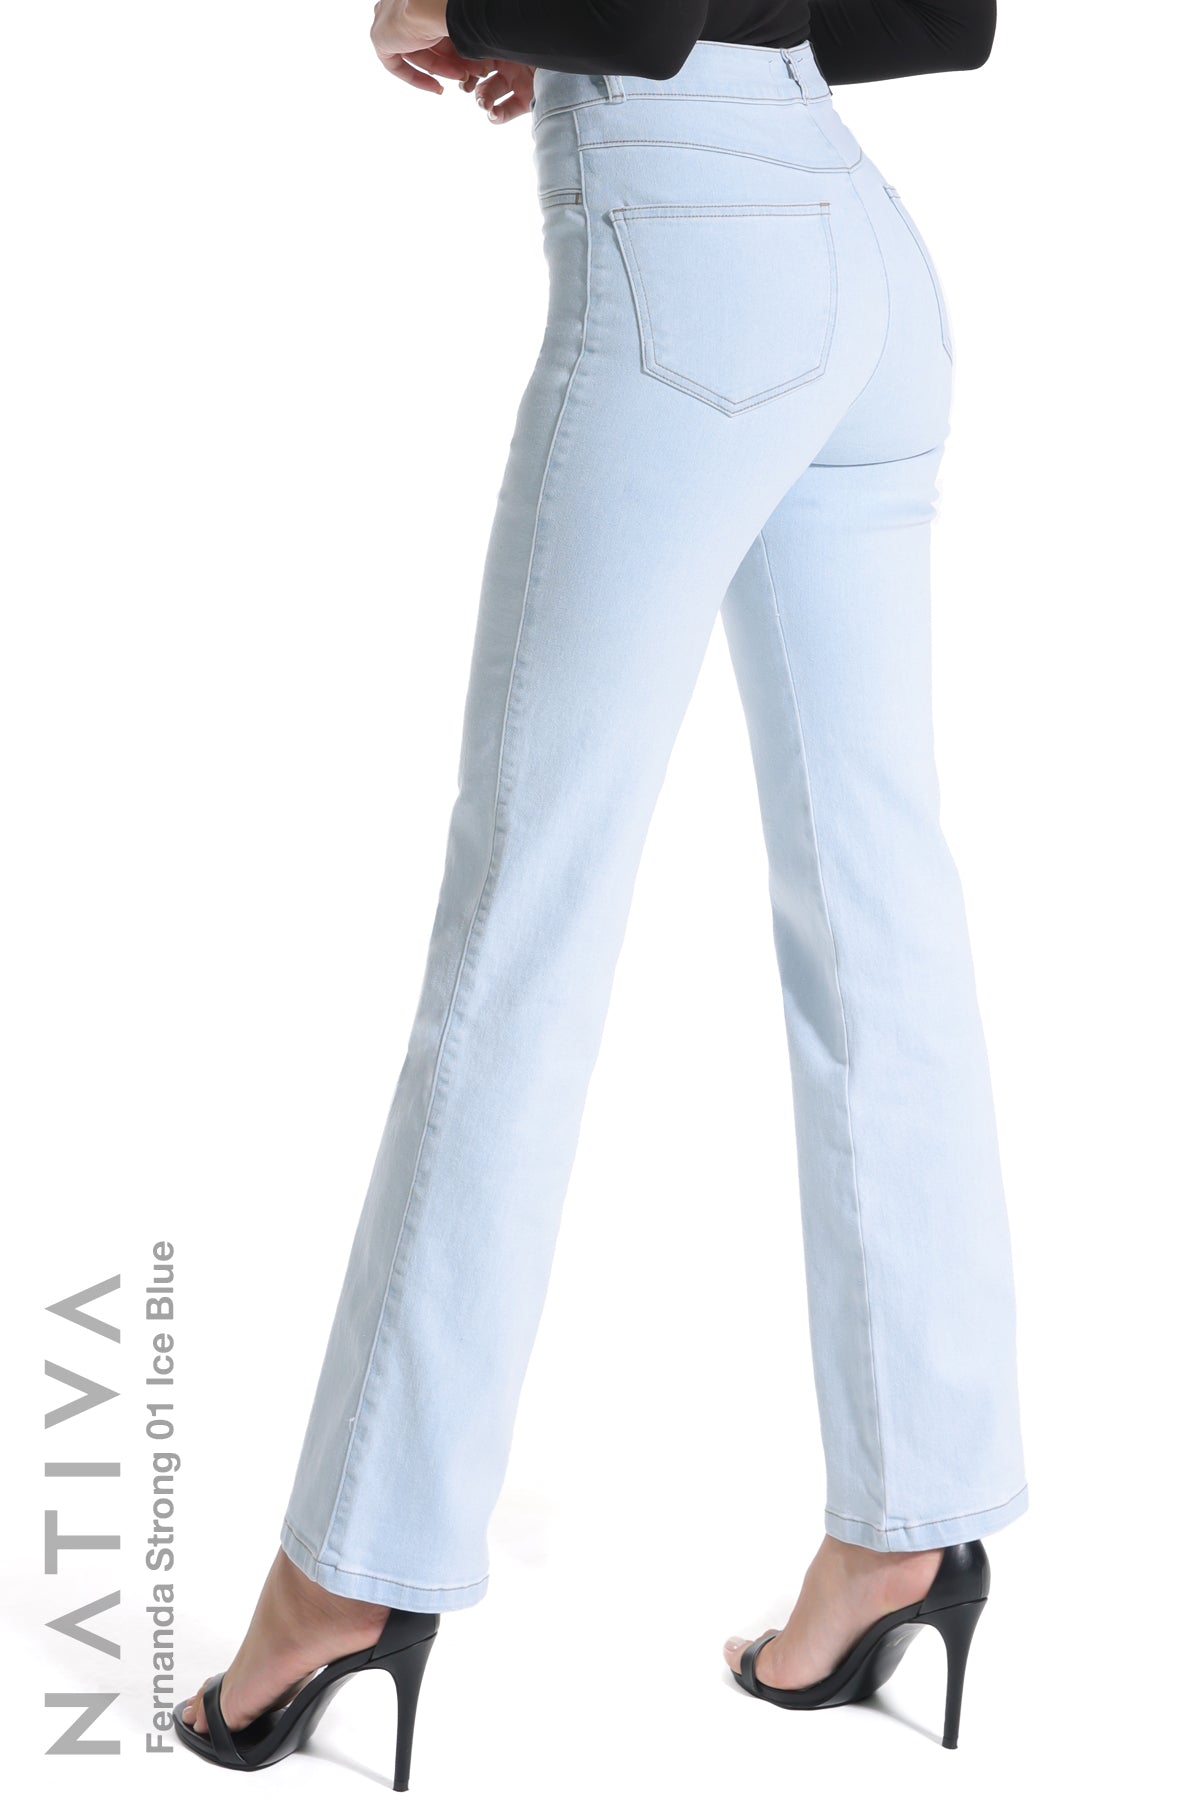 STRAIGHT JEANS, FERNANDA STRONG 01 ICE BLUE. Talle Alto. Con tejidos ESFD (Extreme Stretch Flattering Denim). Cintura Ajustable PERFECT FIT®